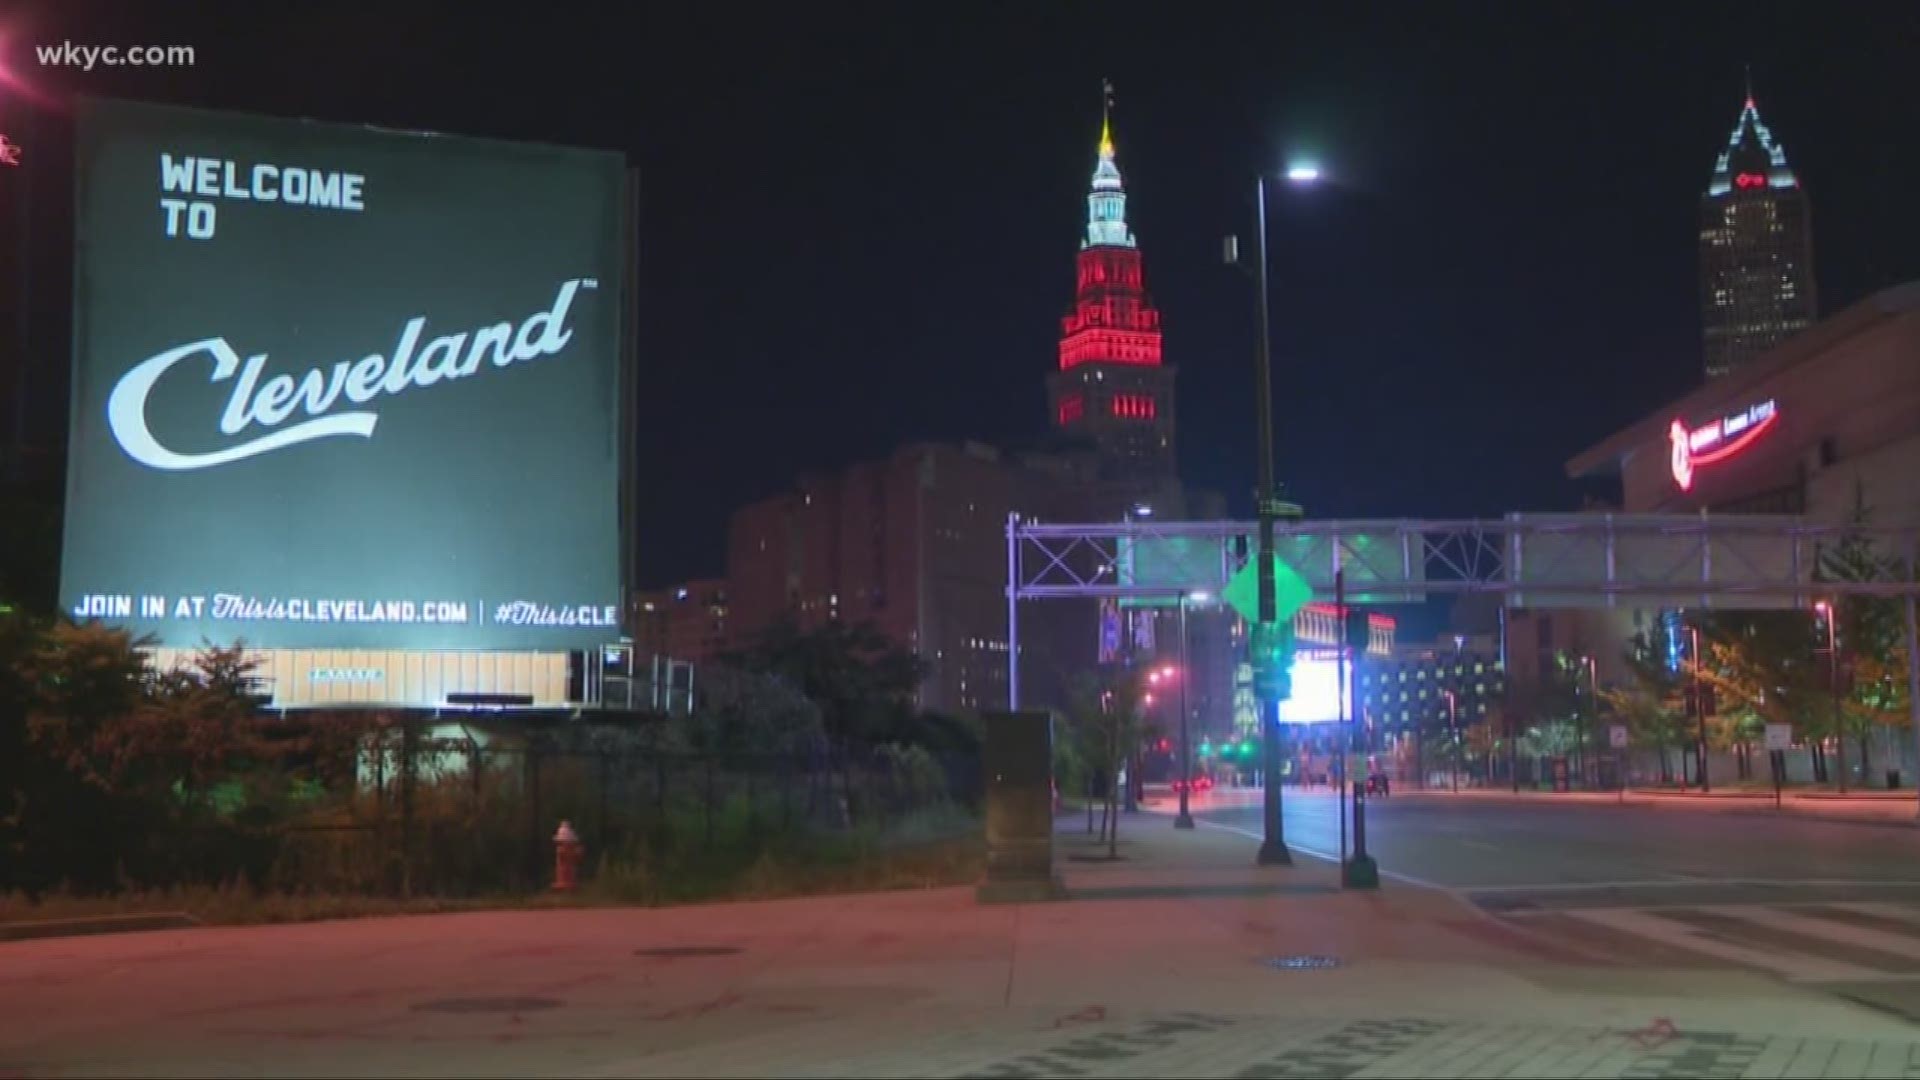 Perspectives on Cleveland's success 3 years the RNC